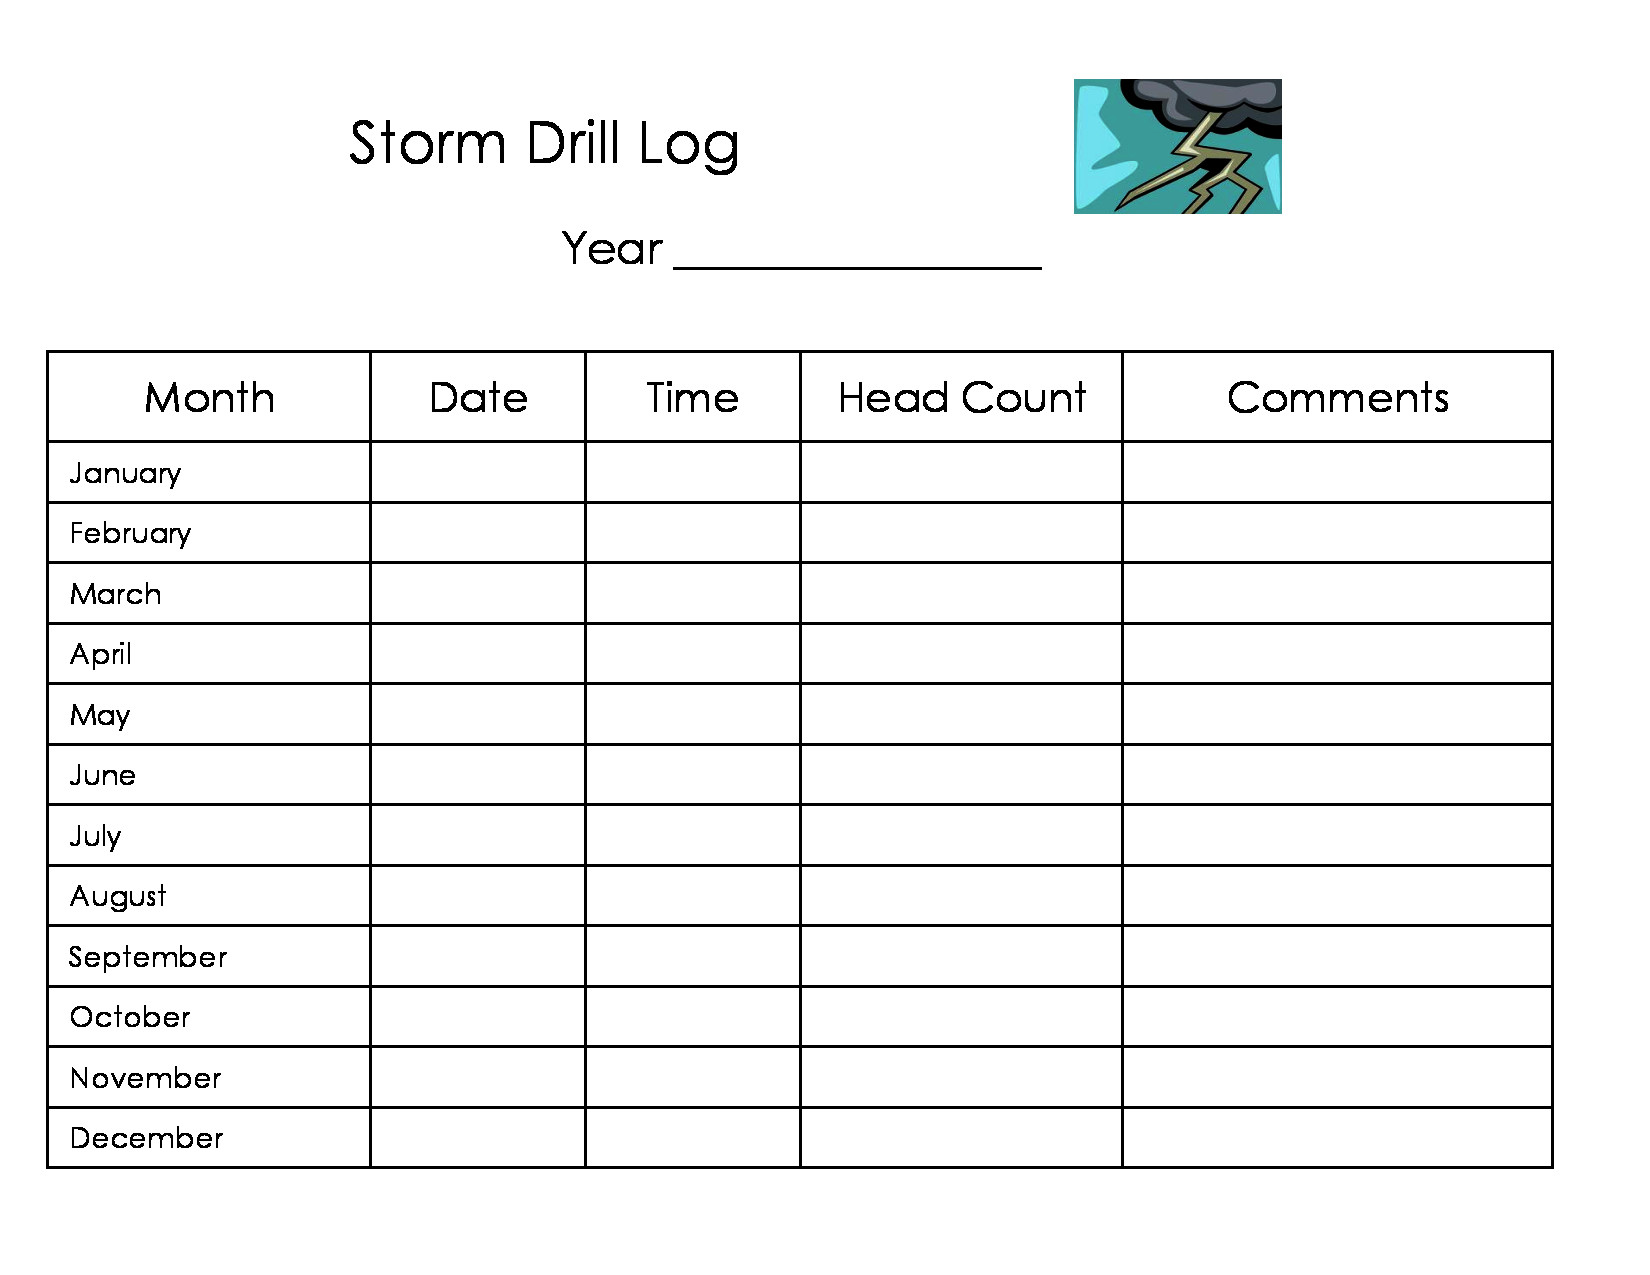 Daycare Storm Drill Log Form